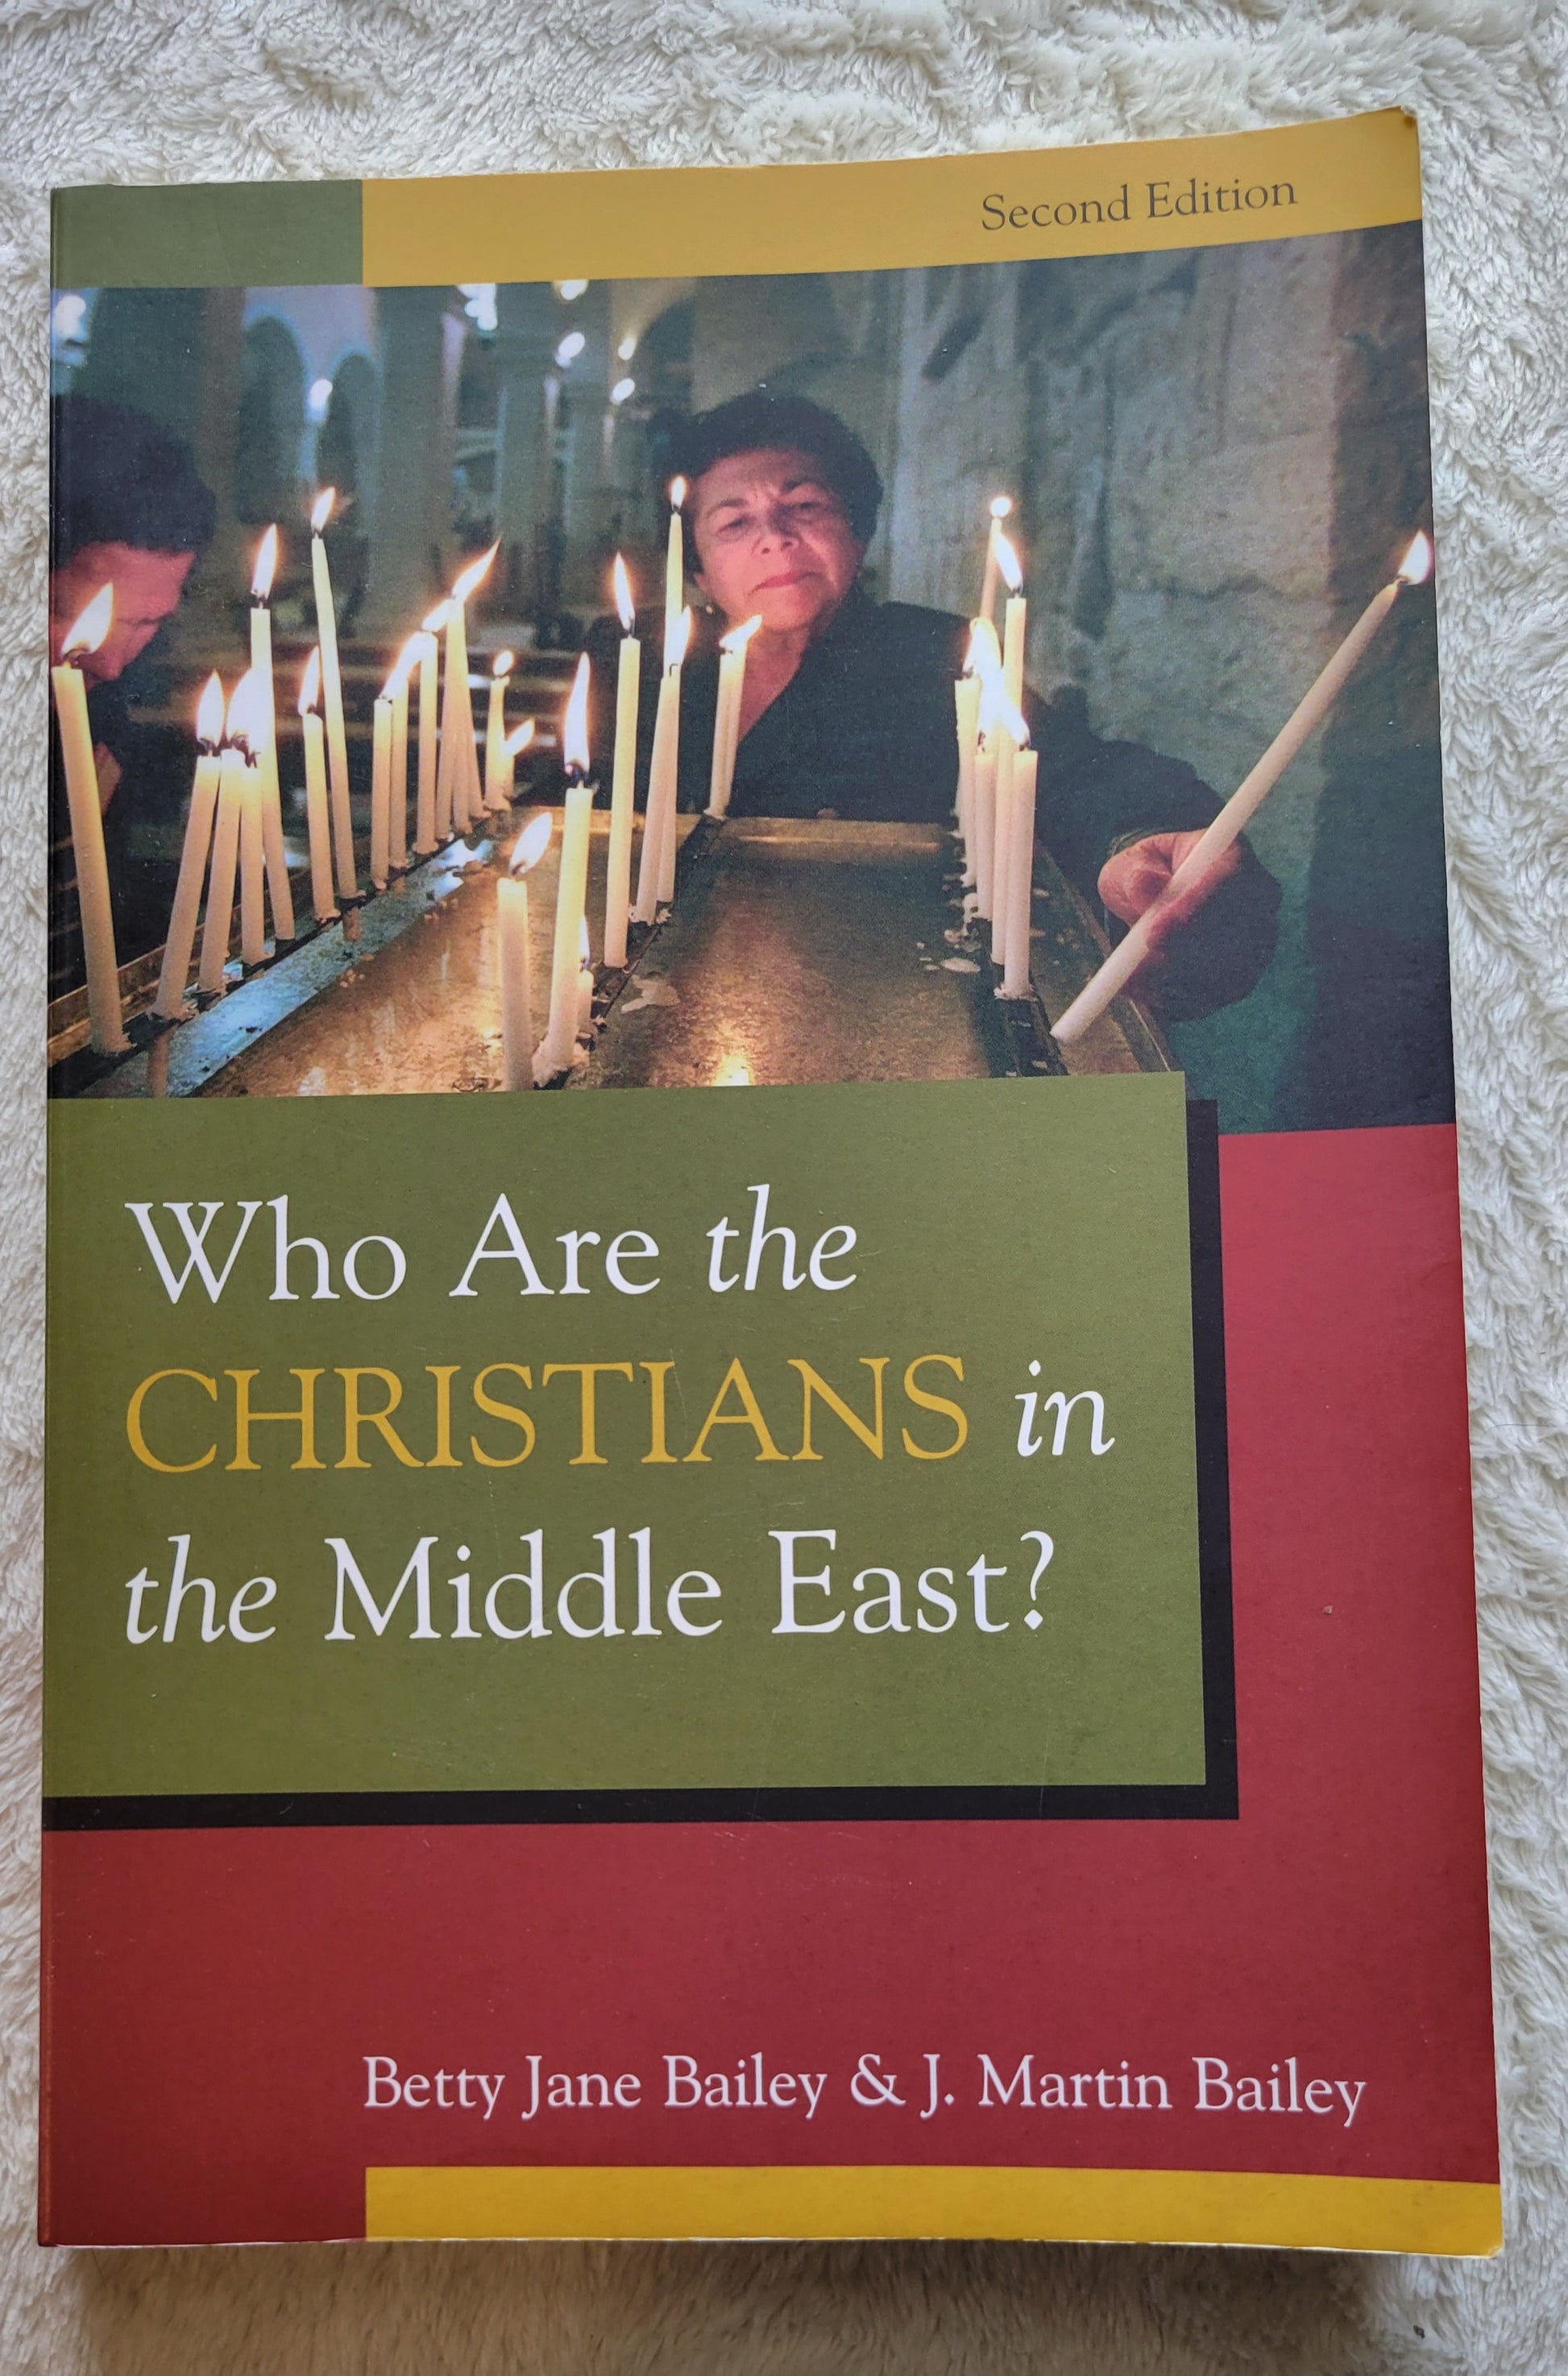 Used book for sale "Who Are the Christians in the Middle East?" Second Edition, by Betty Jane Bailey & J. Martin Bailey, published by Wm. B. Eerdmans Publishing Co. in 2010. Front cover.